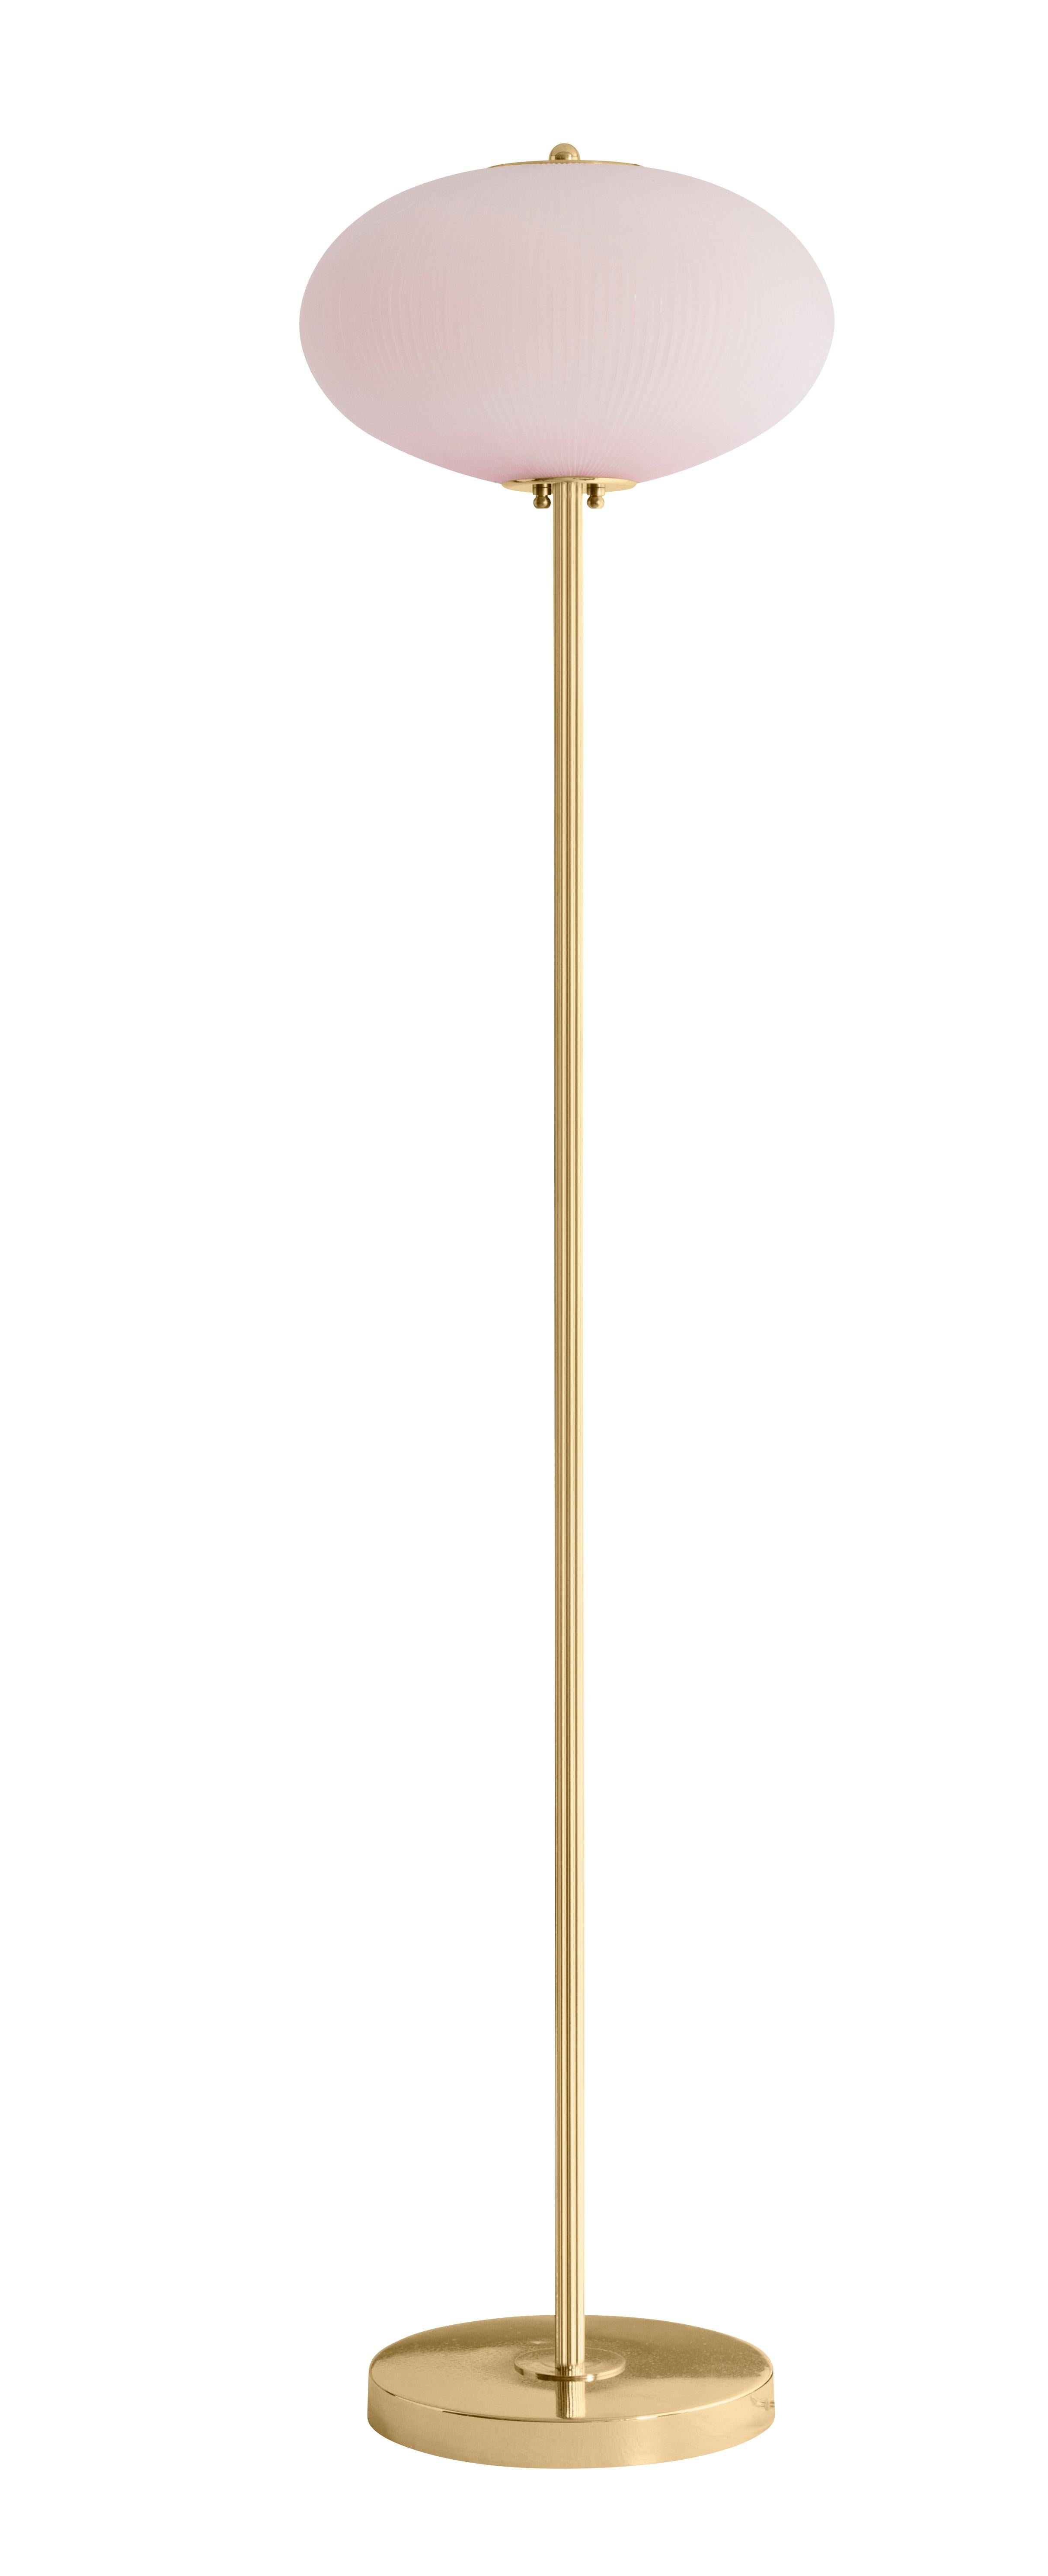 Floor lamp China 07 by Magic Circus Editions
Dimensions: H 150 x W 32 x D 32 cm, also available in H 140, 160
Materials: Brass, mouth blown glass sculpted with a diamond saw
Colour: soft rose

Available finishes: Brass, nickel
Available